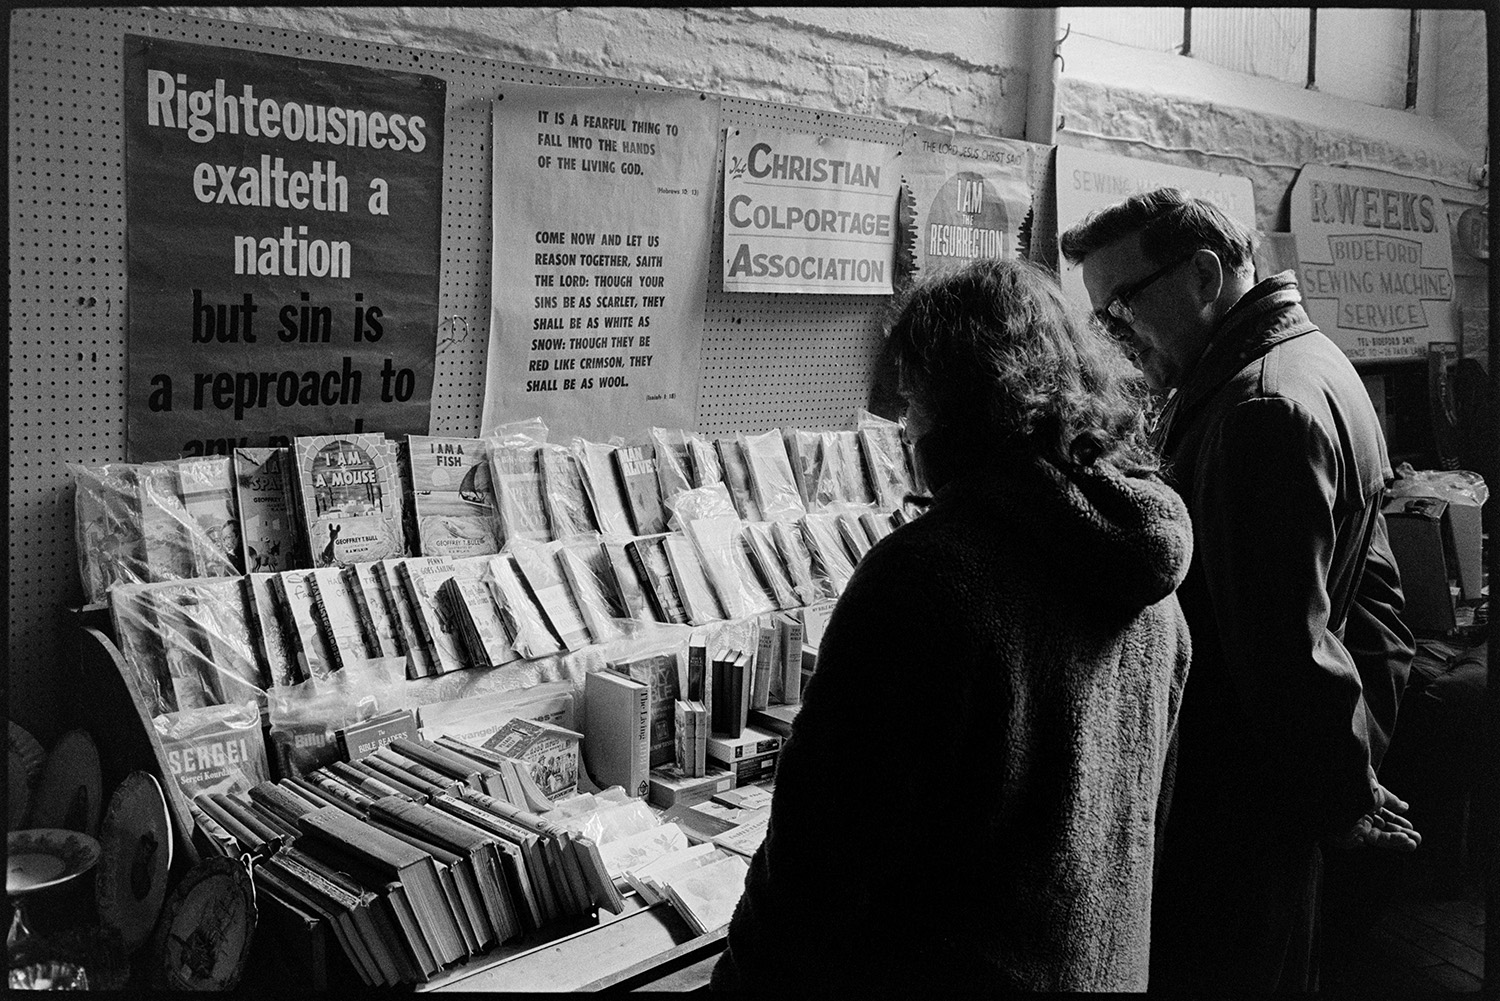 Pannier market, Christian Colportage Association book stall. 
[A man and woman looking at the Christian Colportage Association book stall at Bideford Pannier Market. Religious posters are displayed on the wall behind the book stall.]